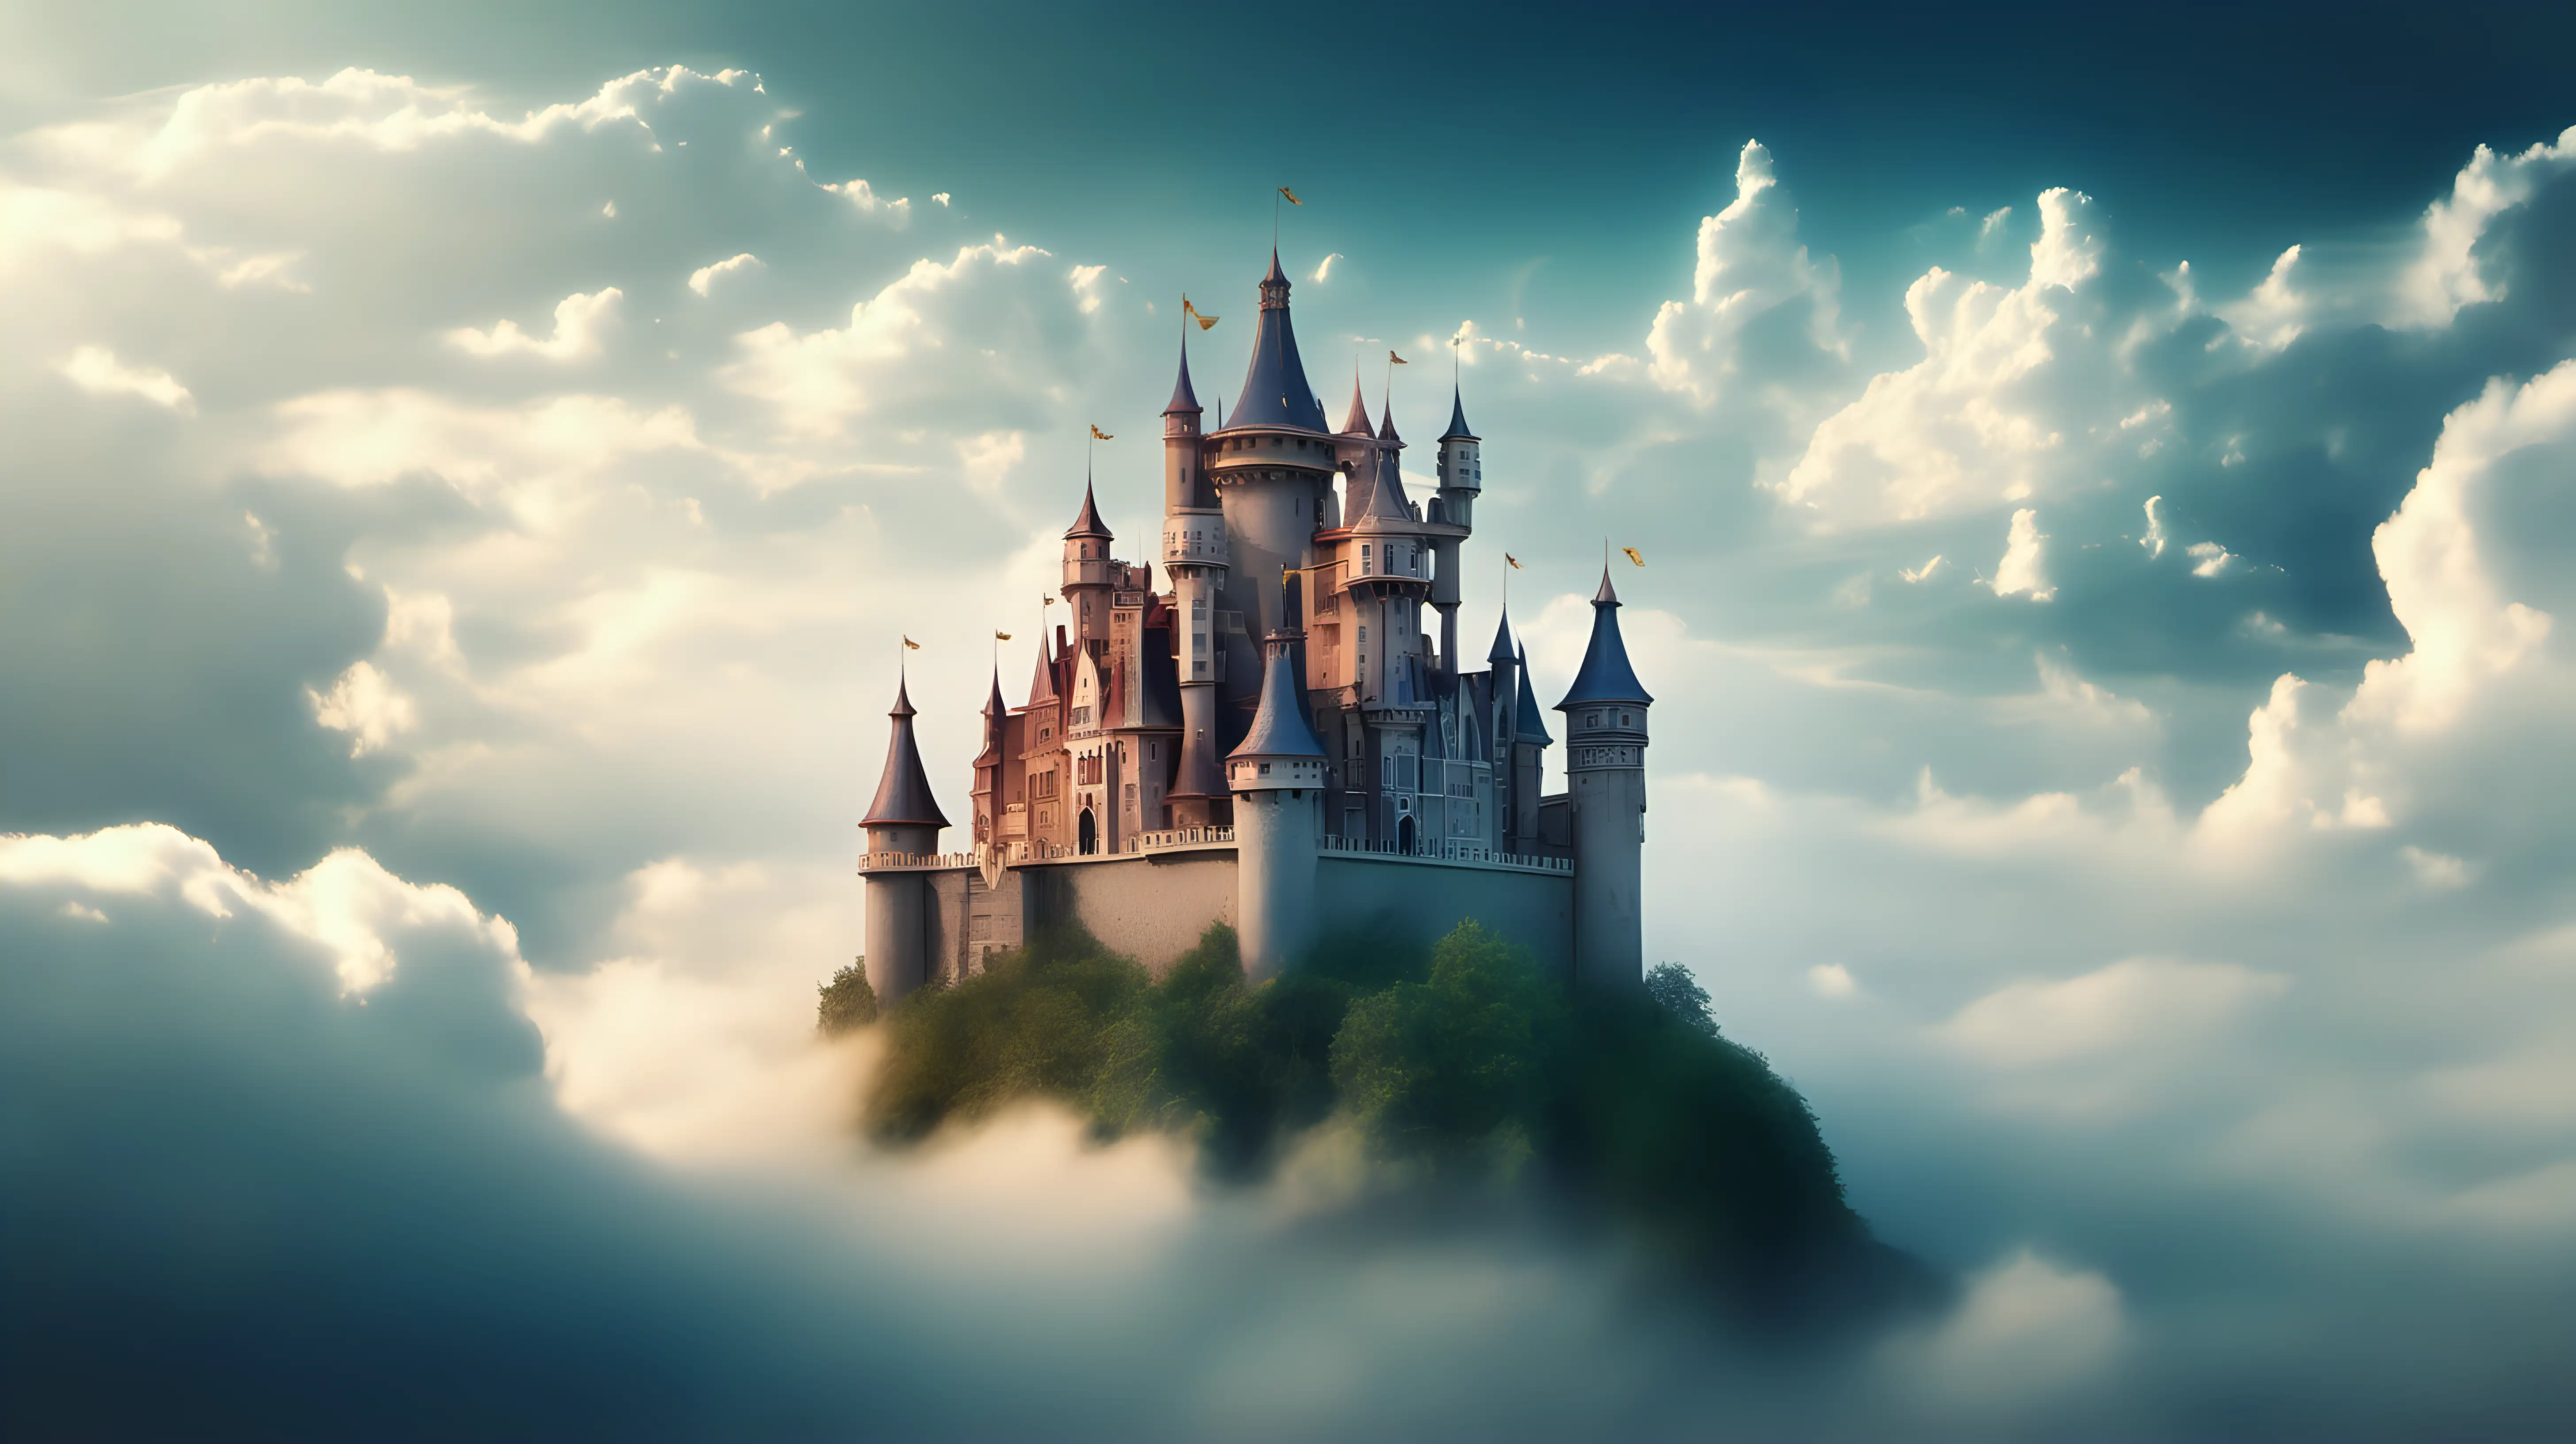 Enchanted Fairytale Castle Floating Among the Clouds